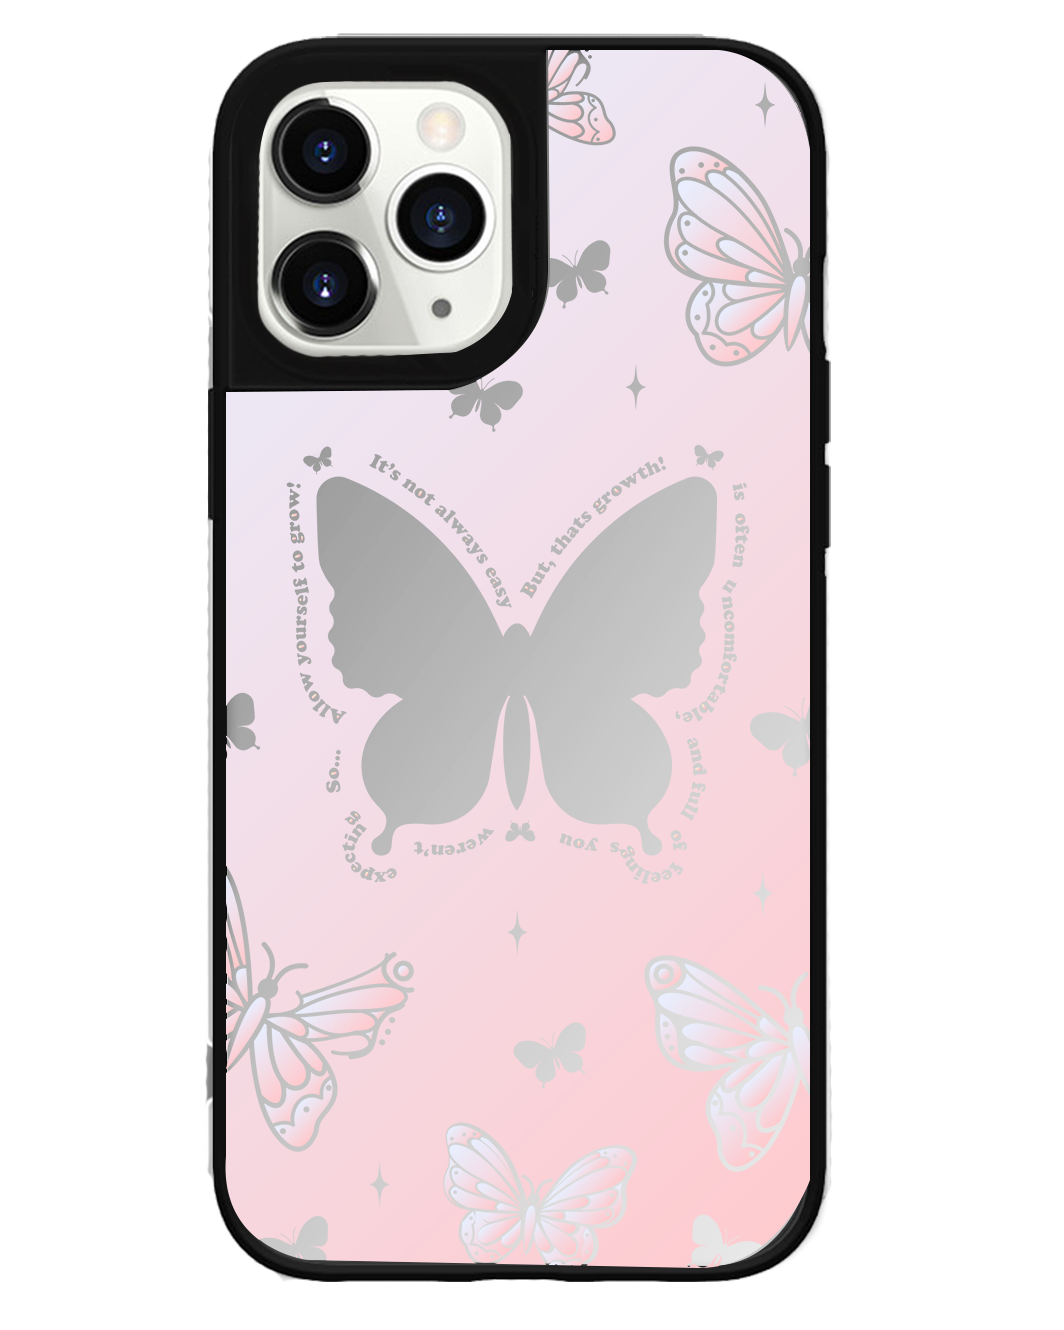 iPhone Mirror Grip Case -  Butterfly Effect 2.0